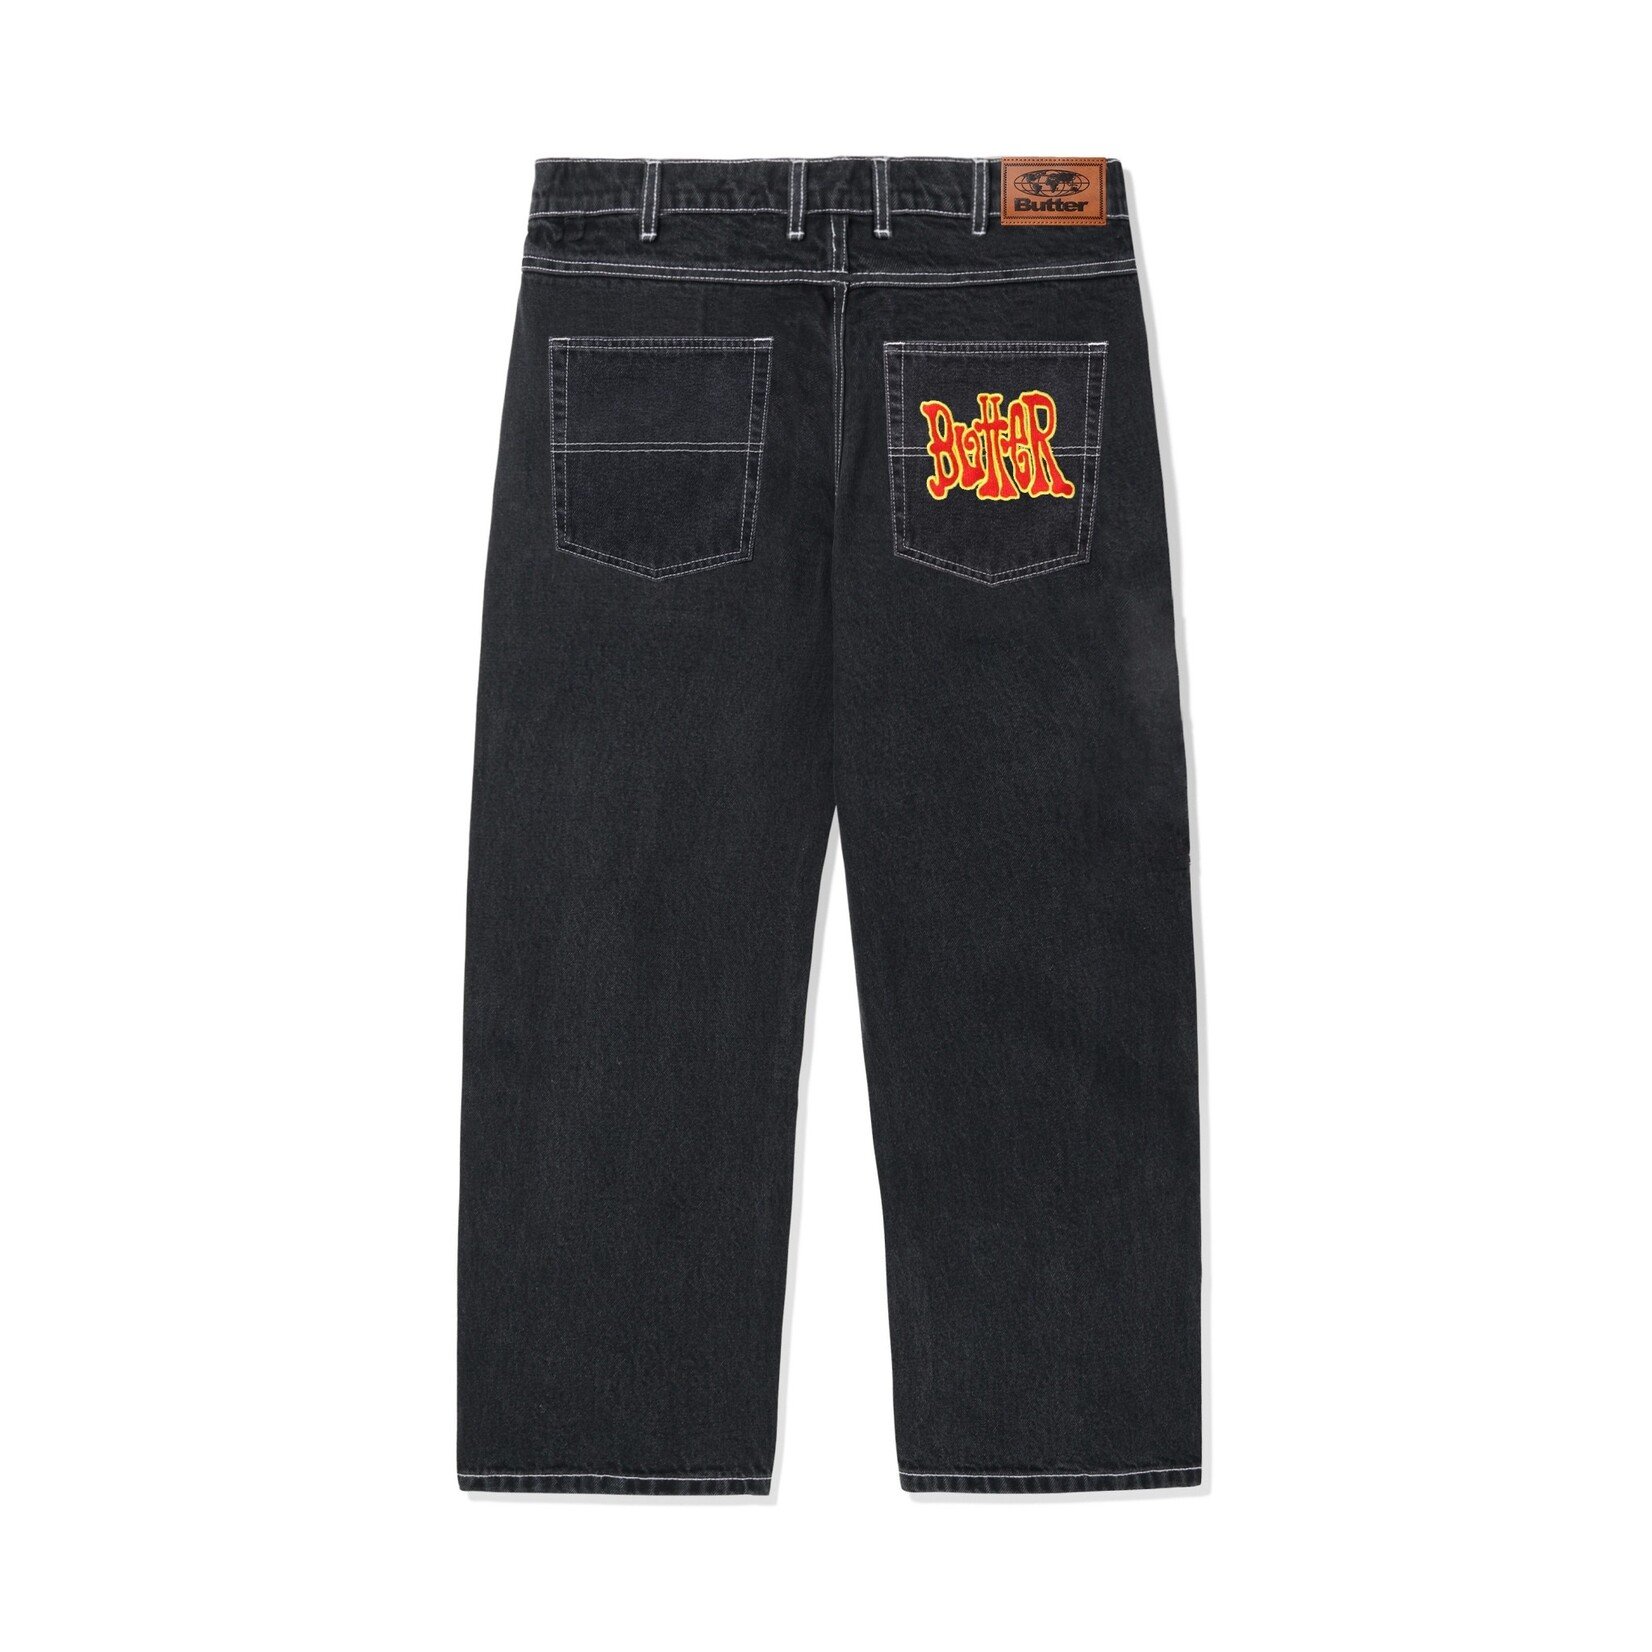 Two Piece Set Of Denim Jeans in Delhi at best price by White Negro  Fabrication - Justdial